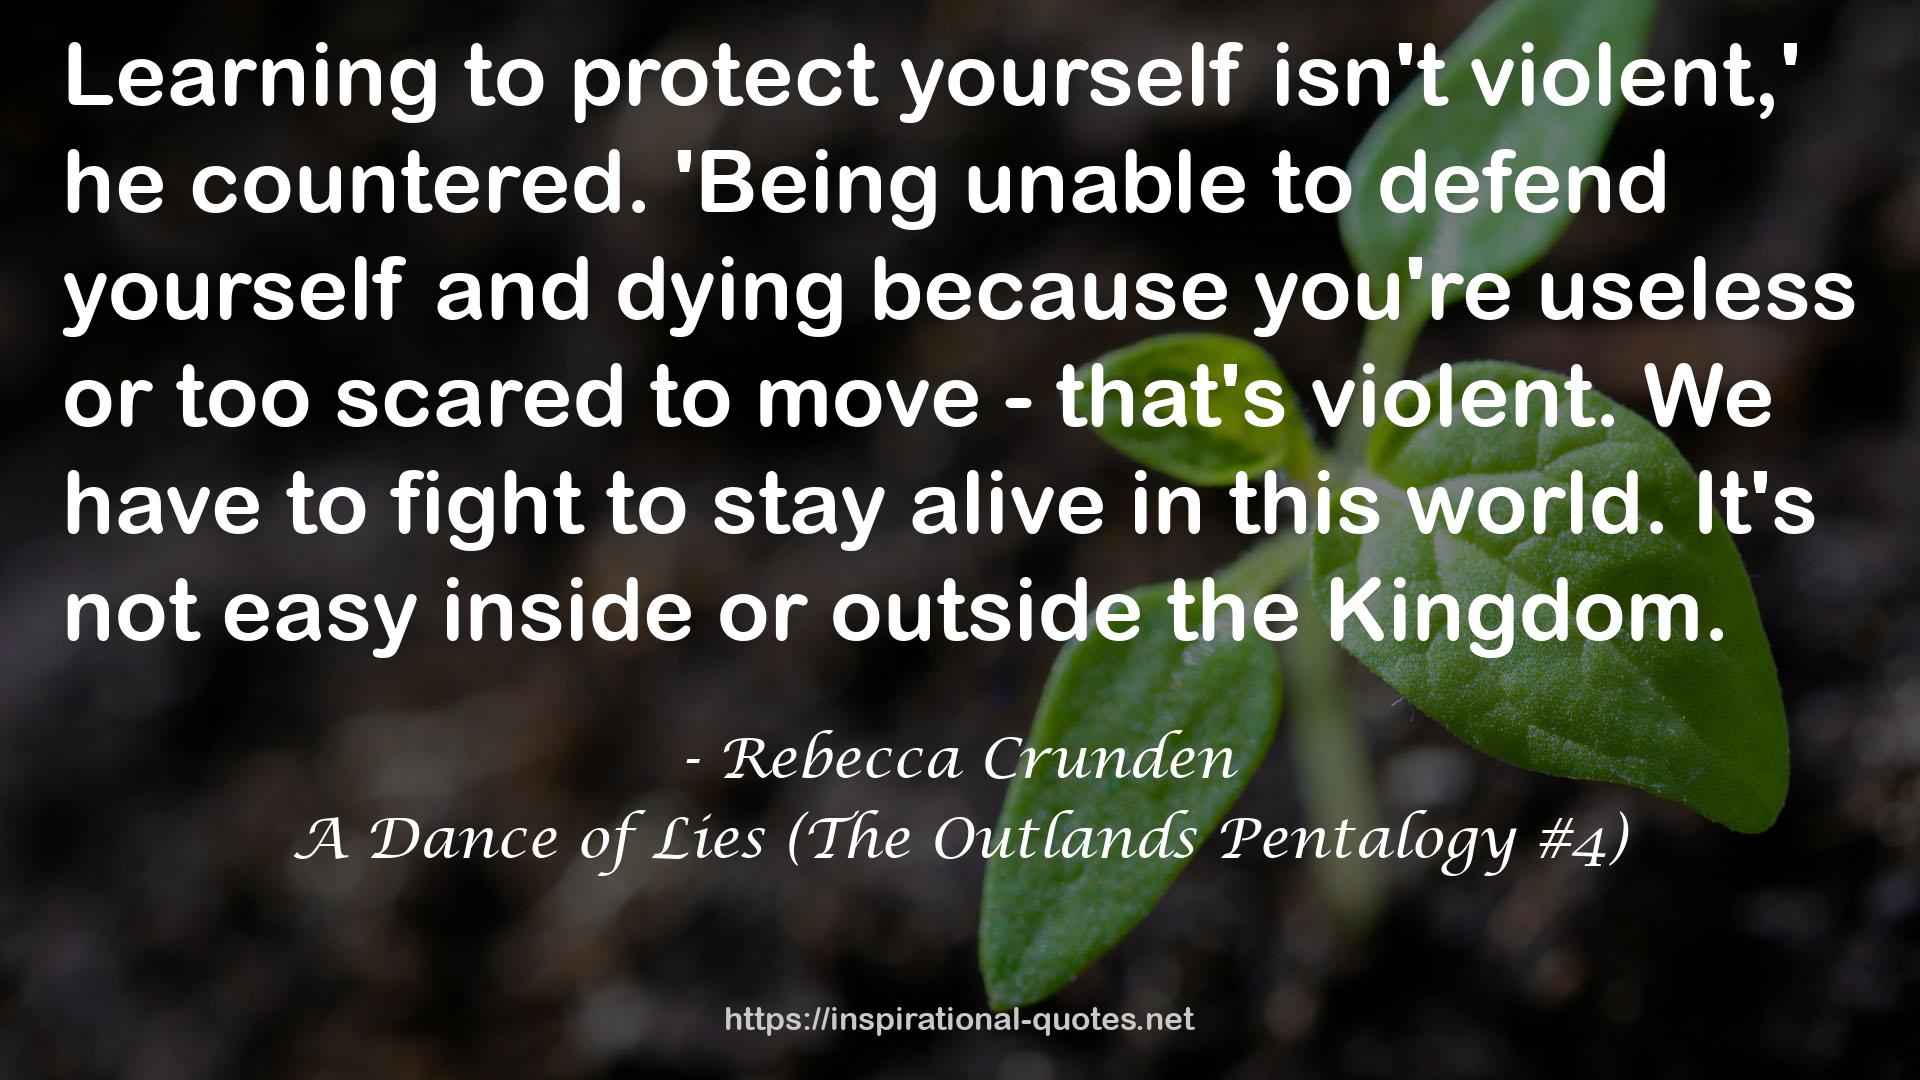 A Dance of Lies (The Outlands Pentalogy #4) QUOTES